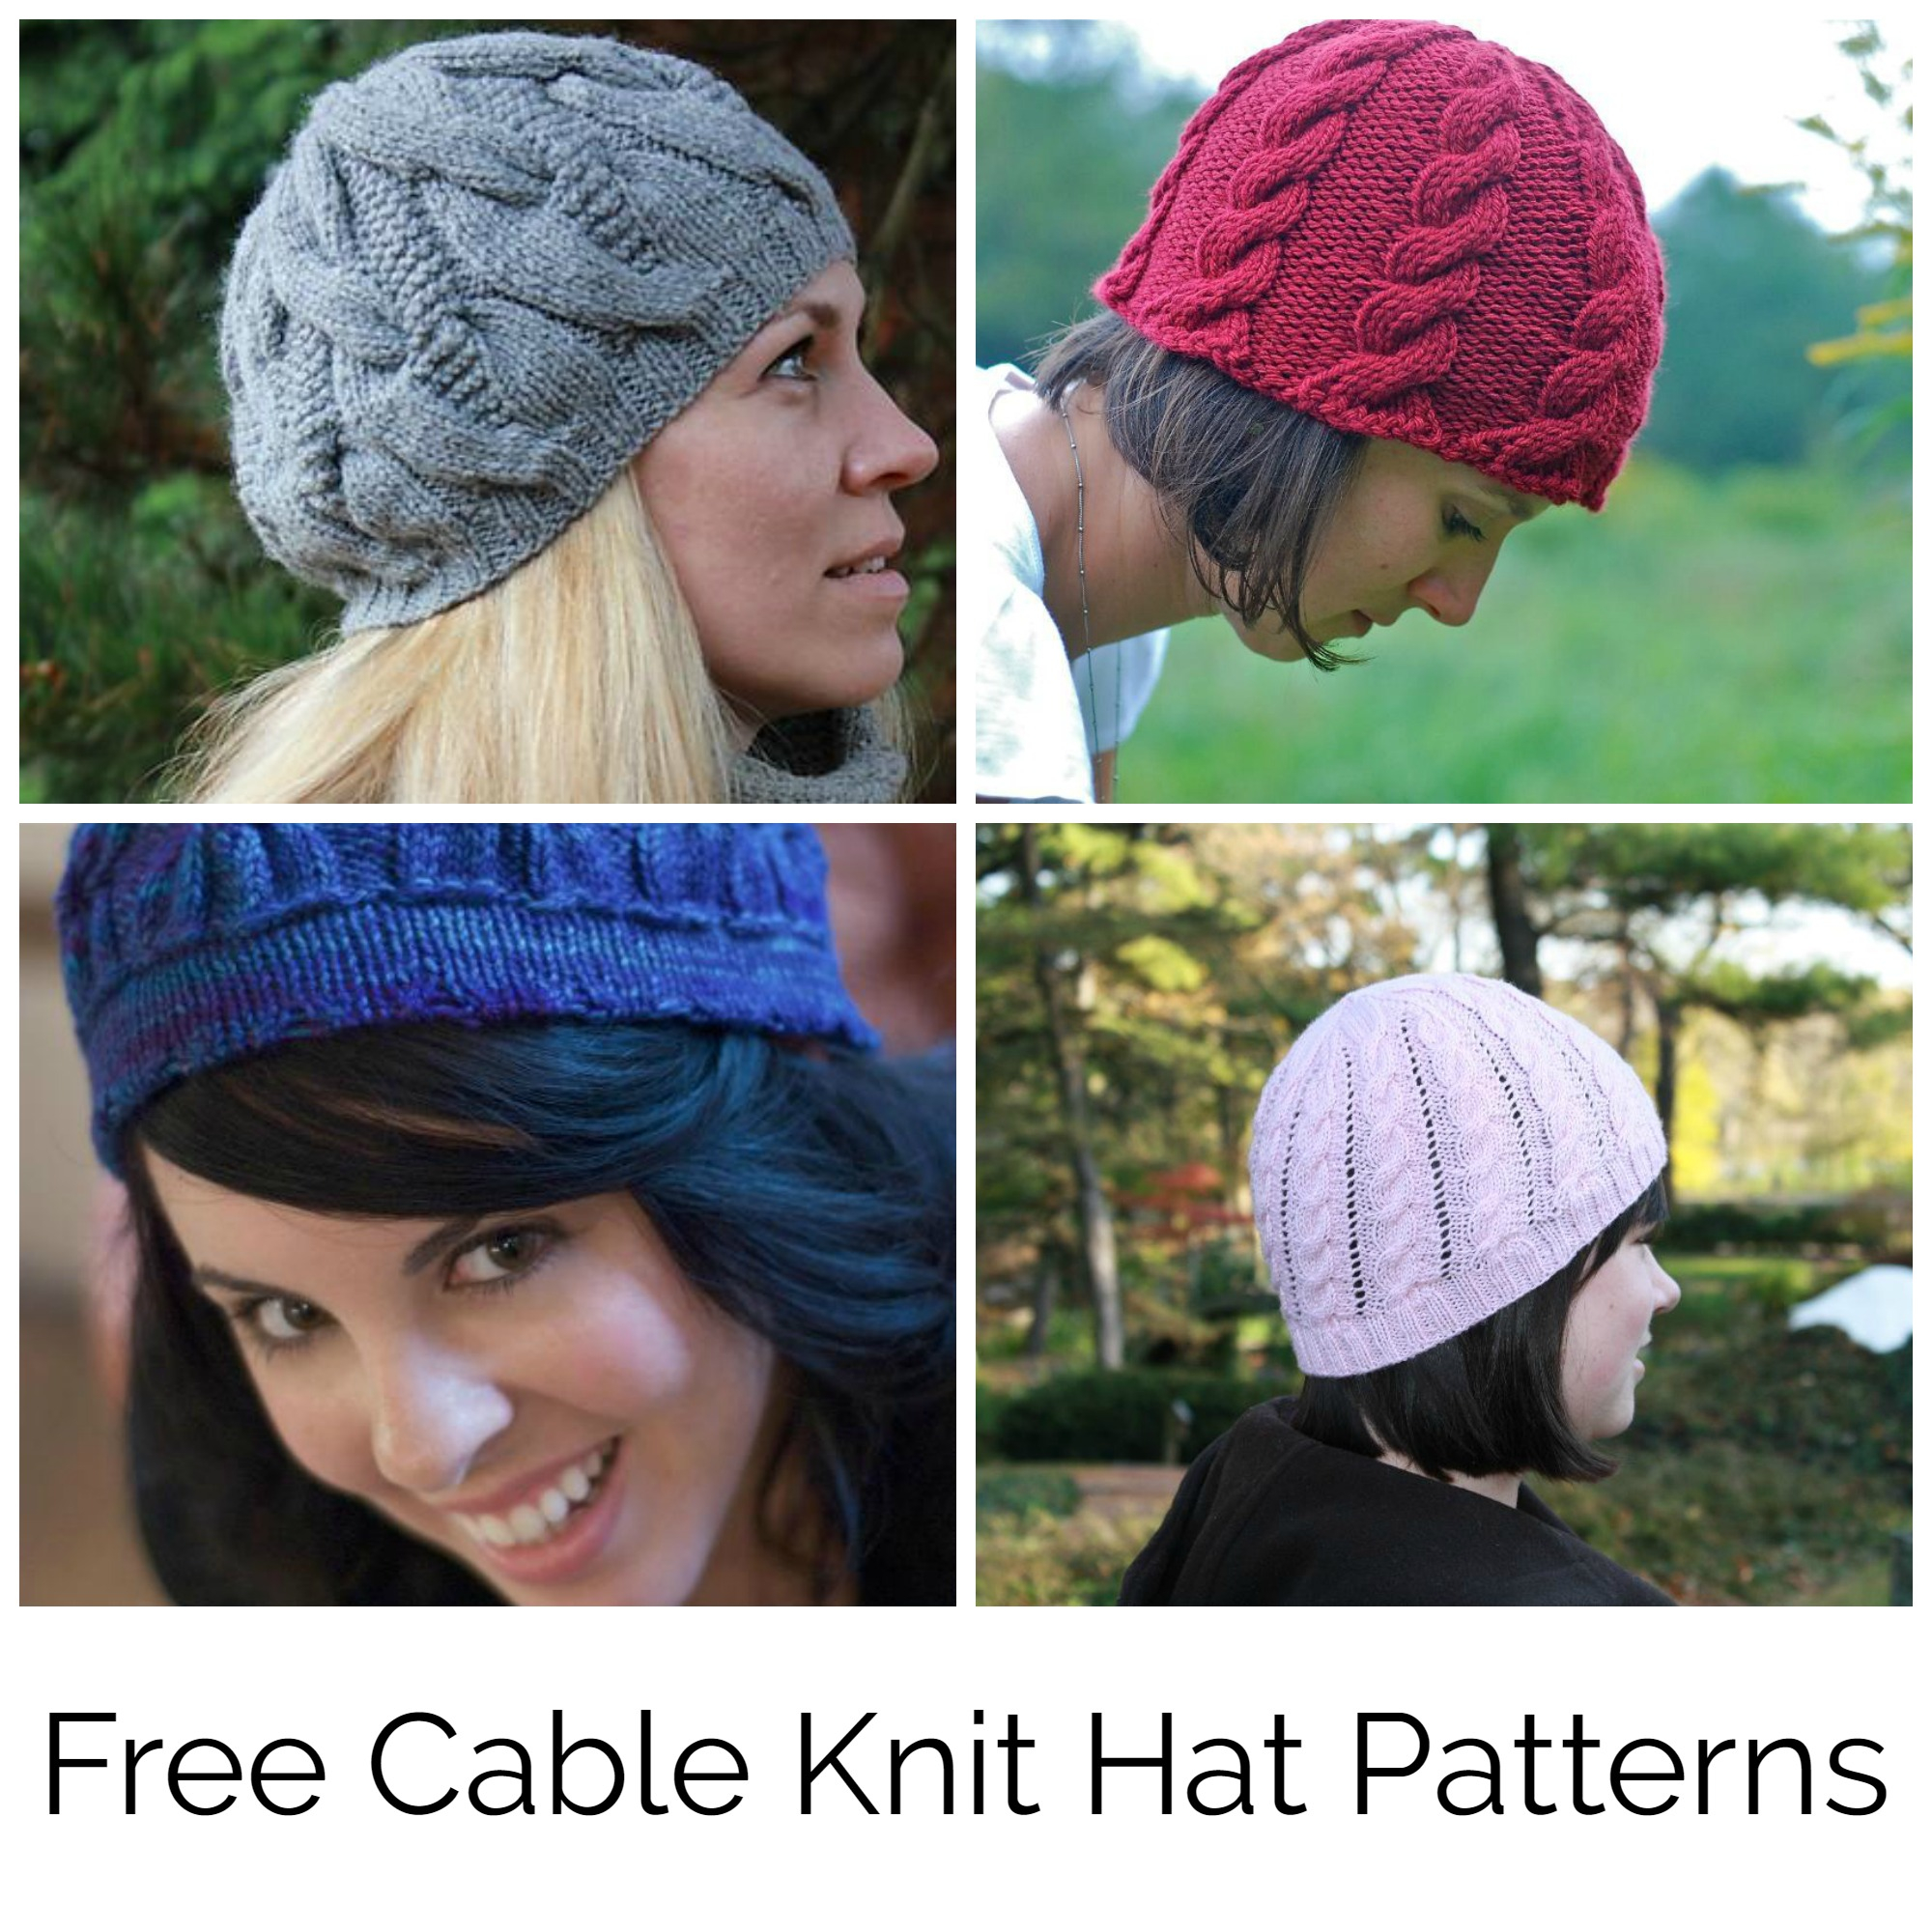 Hats To Knit Free Patterns Find Your Favorite Free Cable Knit Hat Pattern